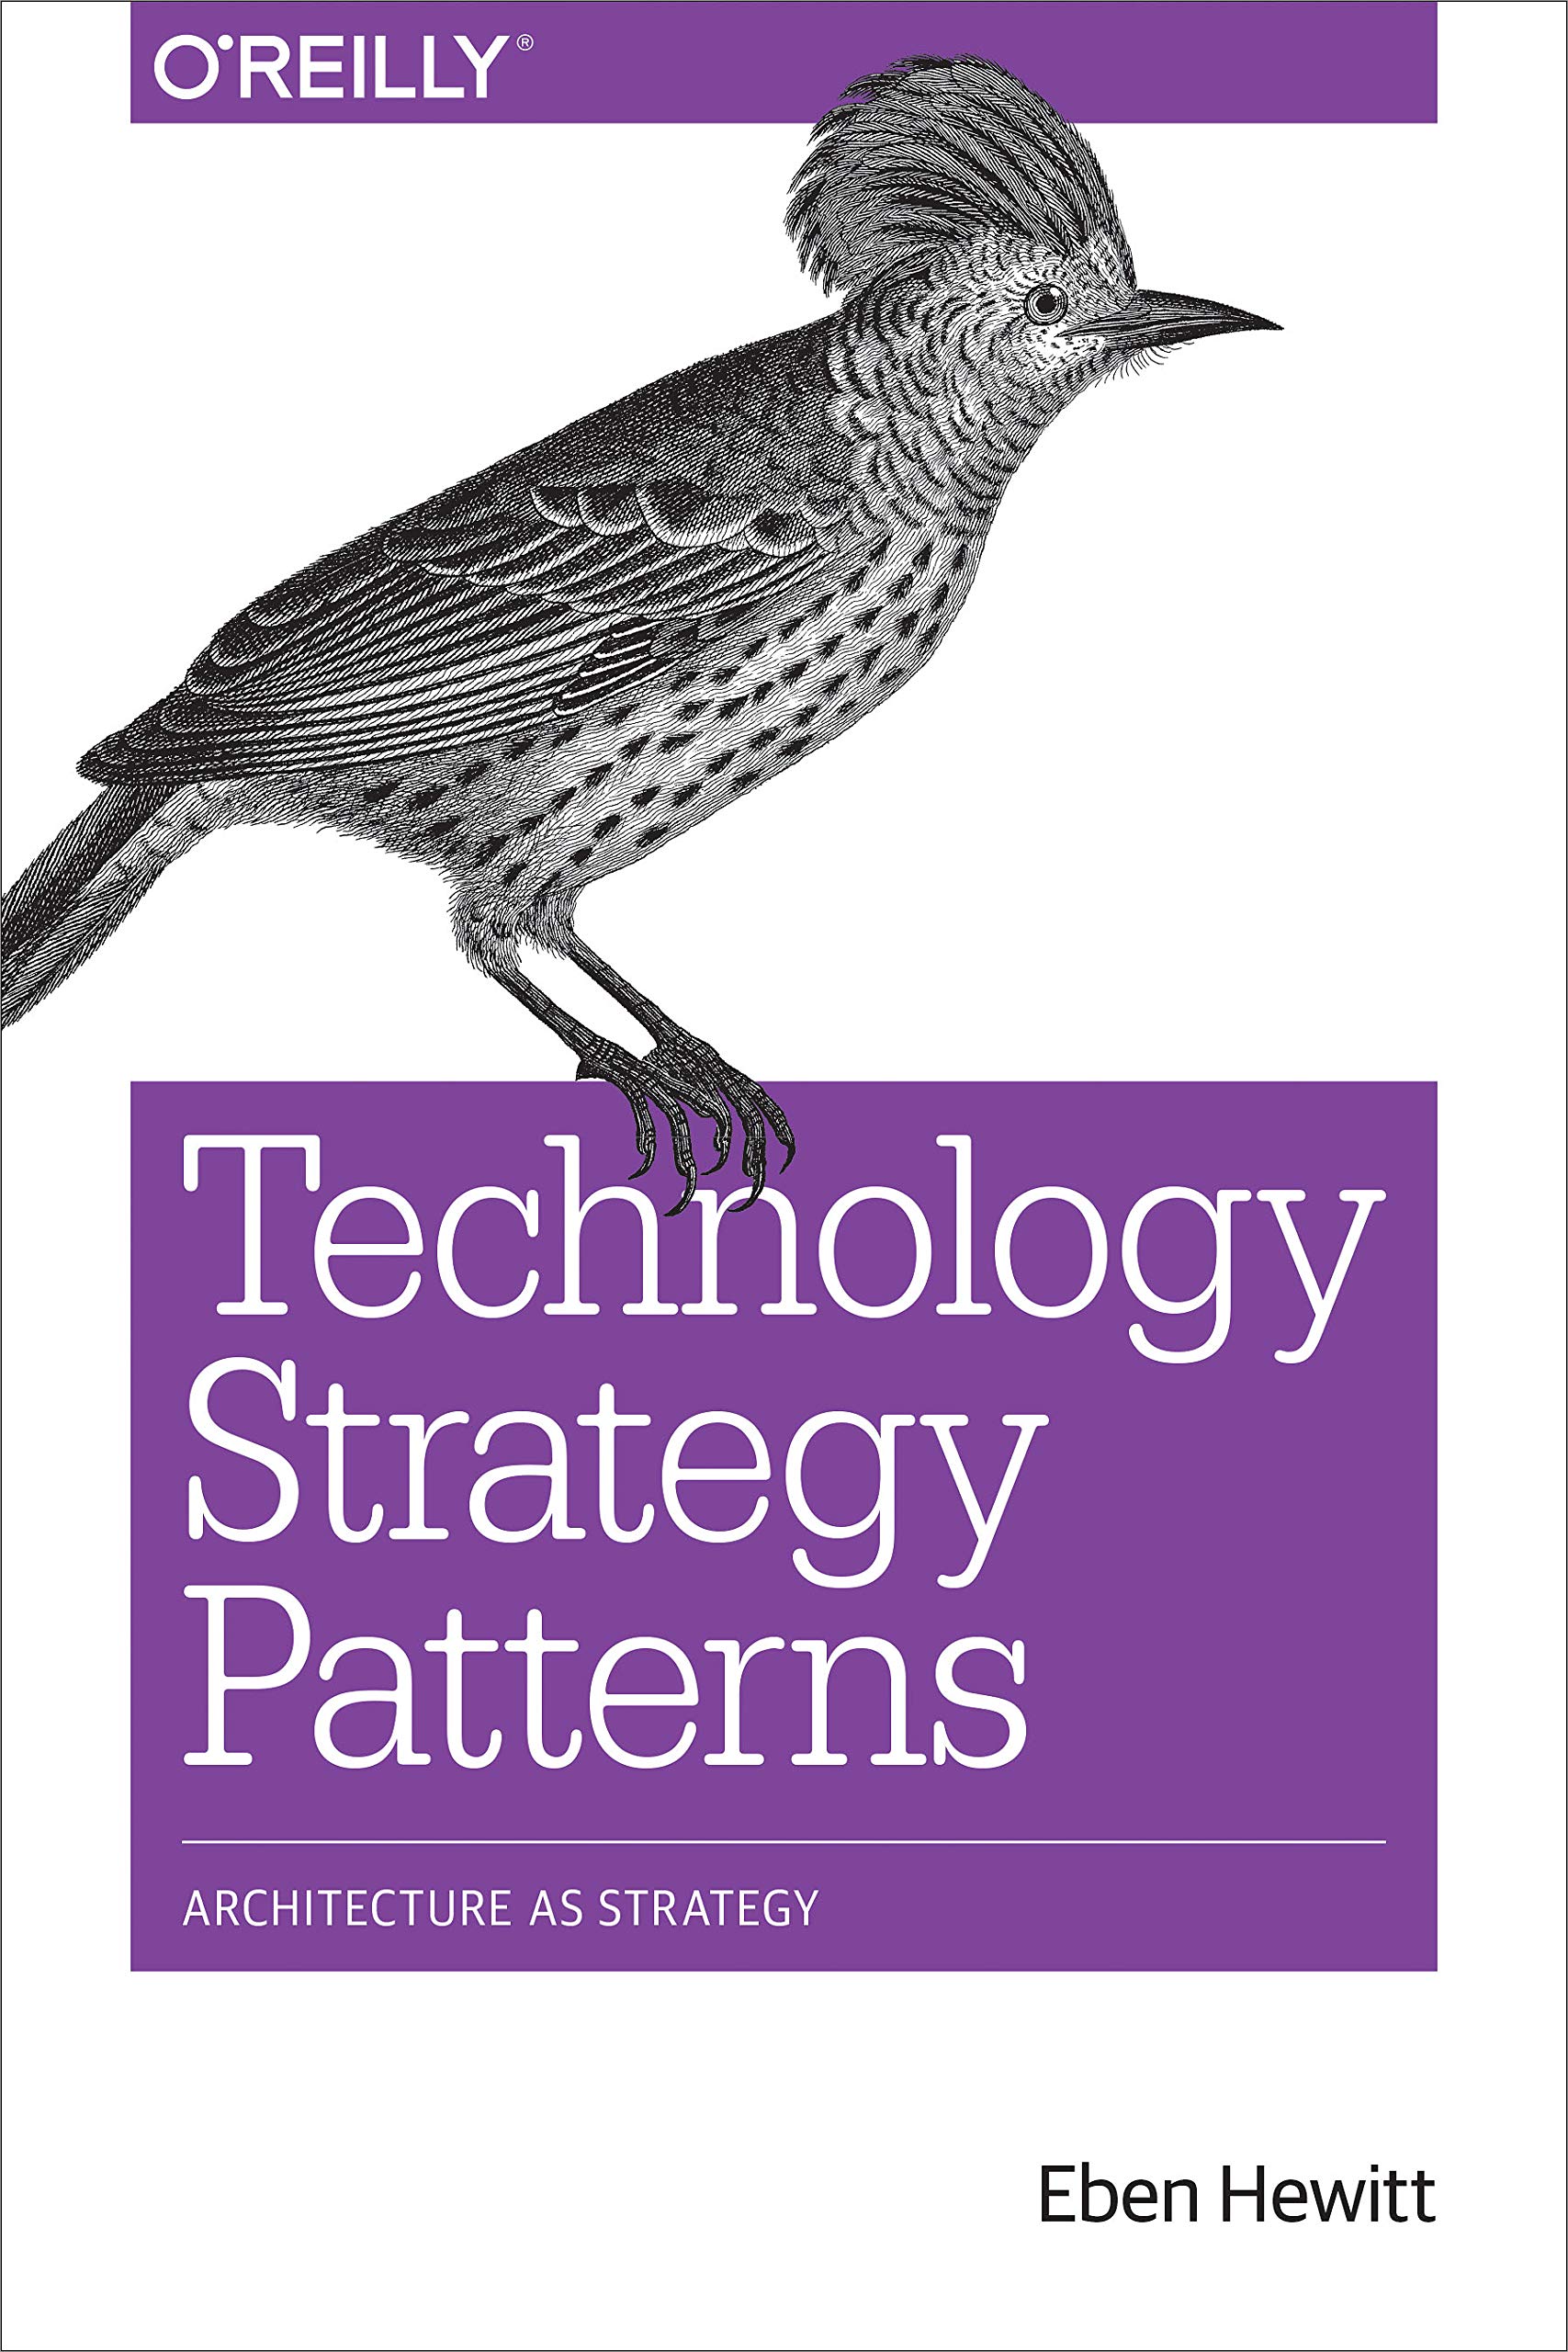 Technology Strategy Patterns (2018, O'Reilly Media, Incorporated)